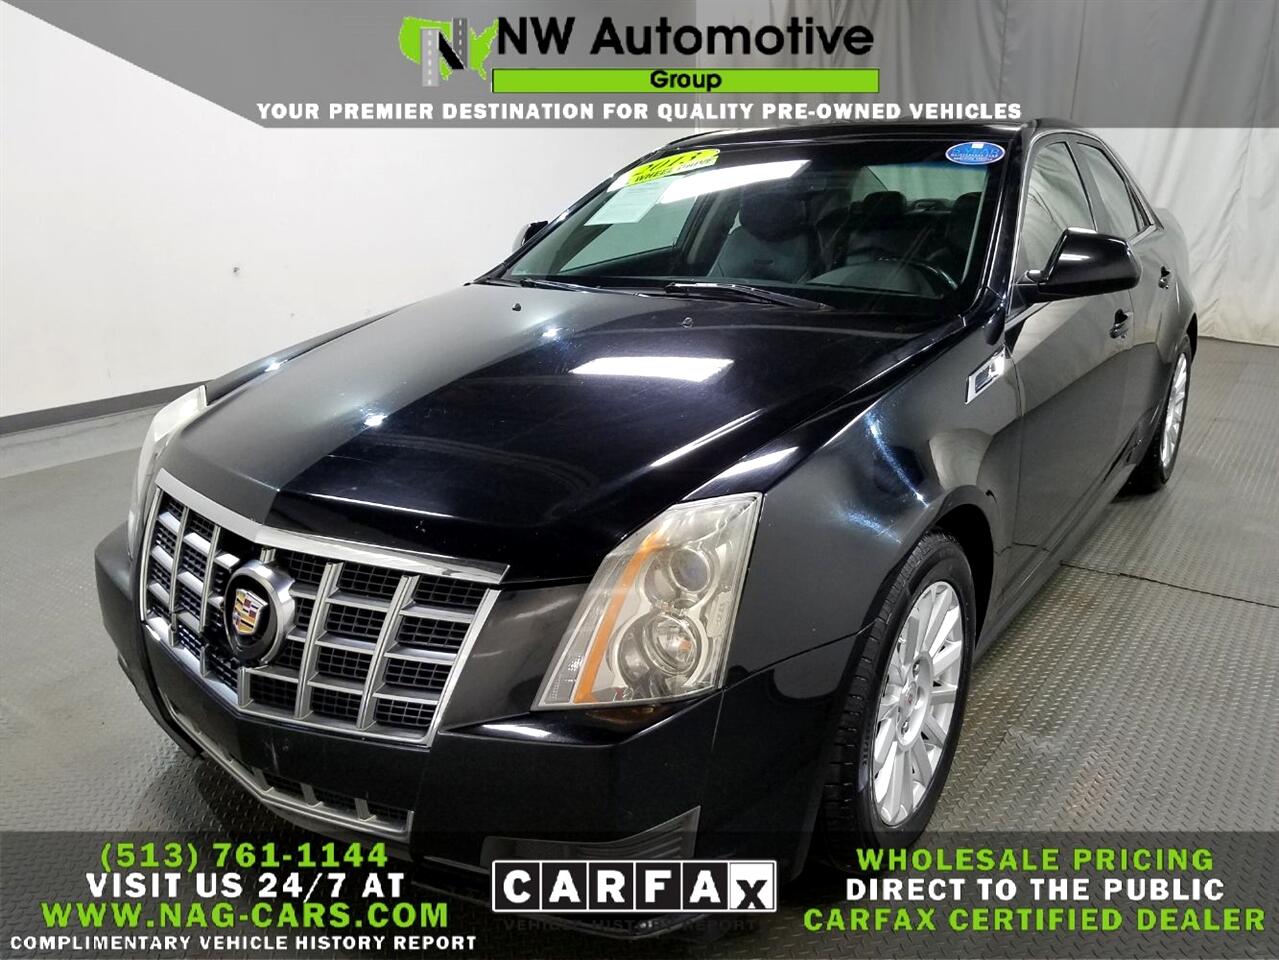 Cadillac CTS 4dr Sdn 3.0L Luxury AWD 2013